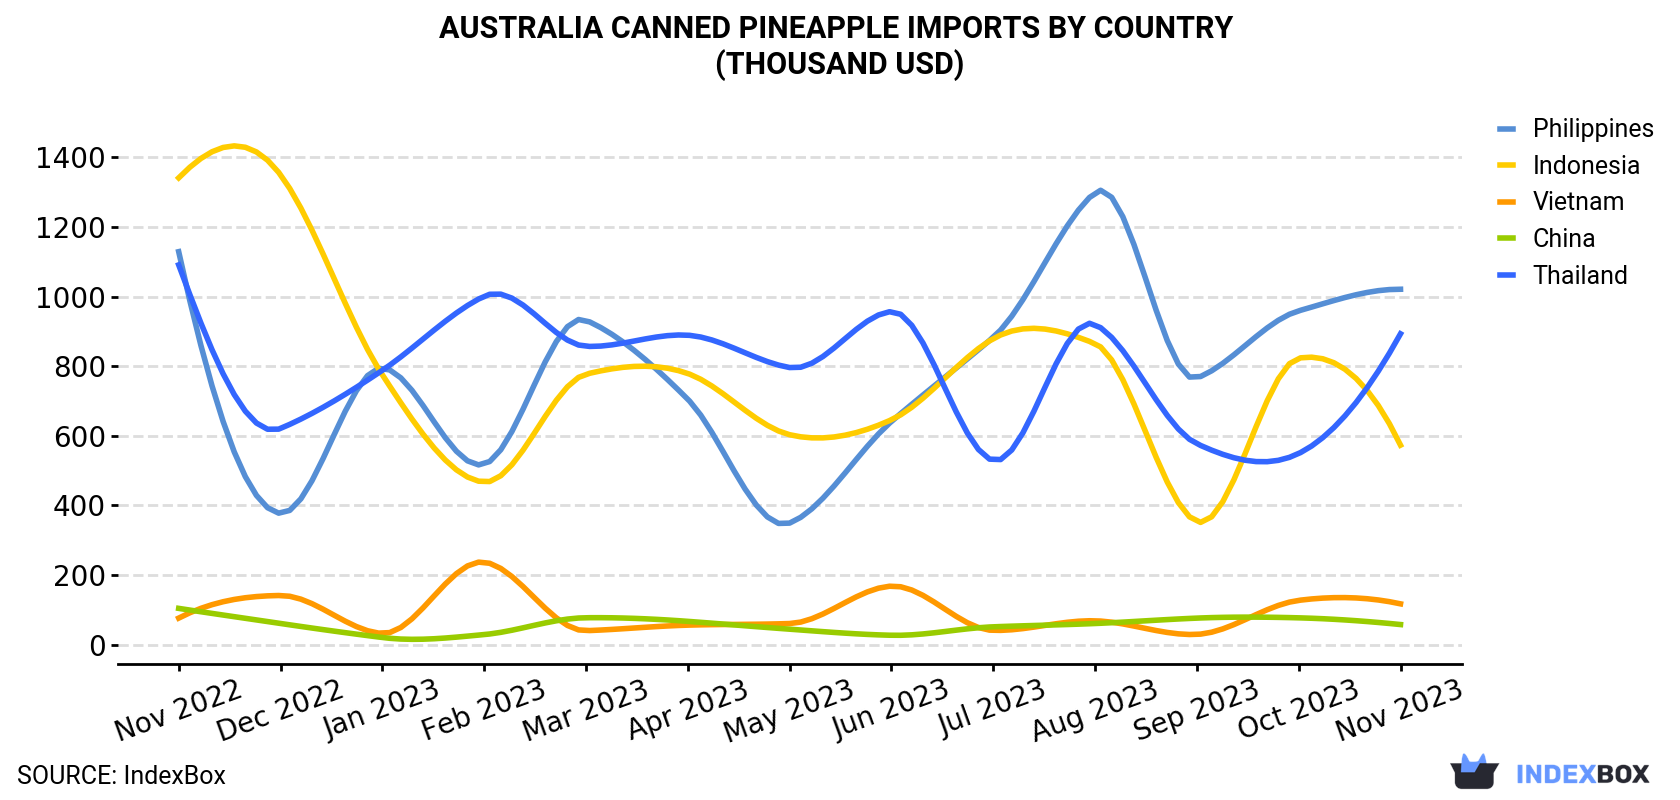 Australia Canned Pineapple Imports By Country (Thousand USD)